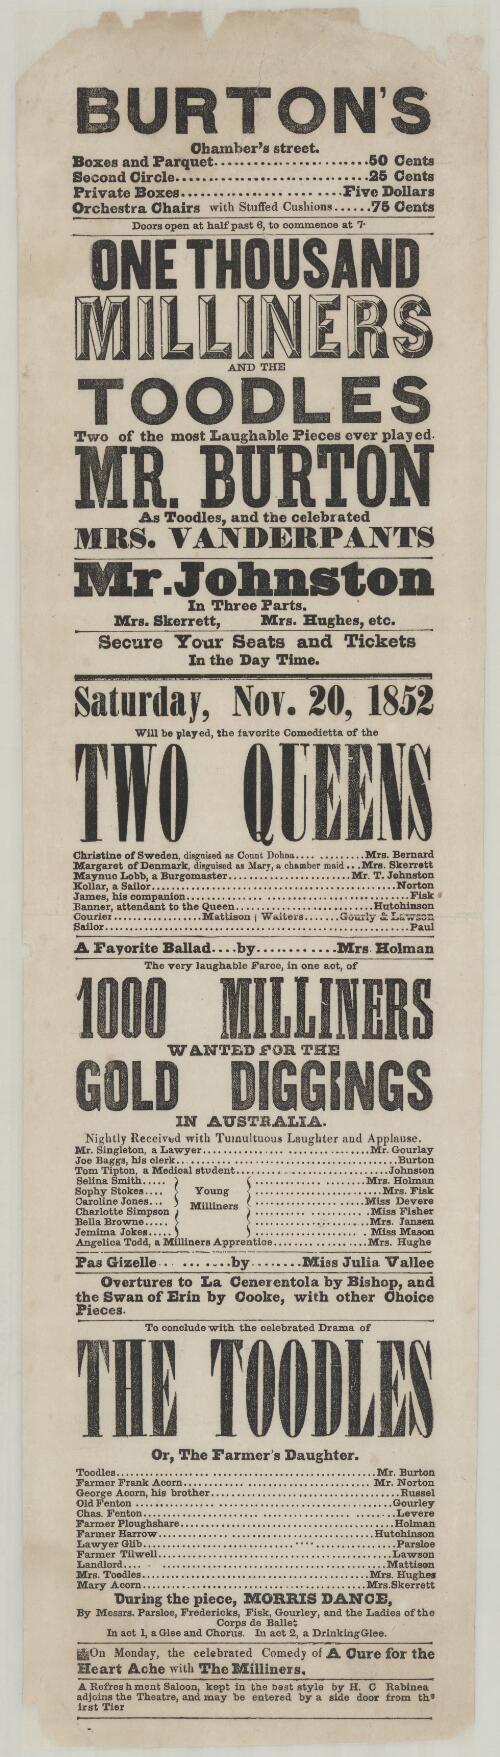 One thousand milliners, and, The toodles : two of the most laughable pieces ever played